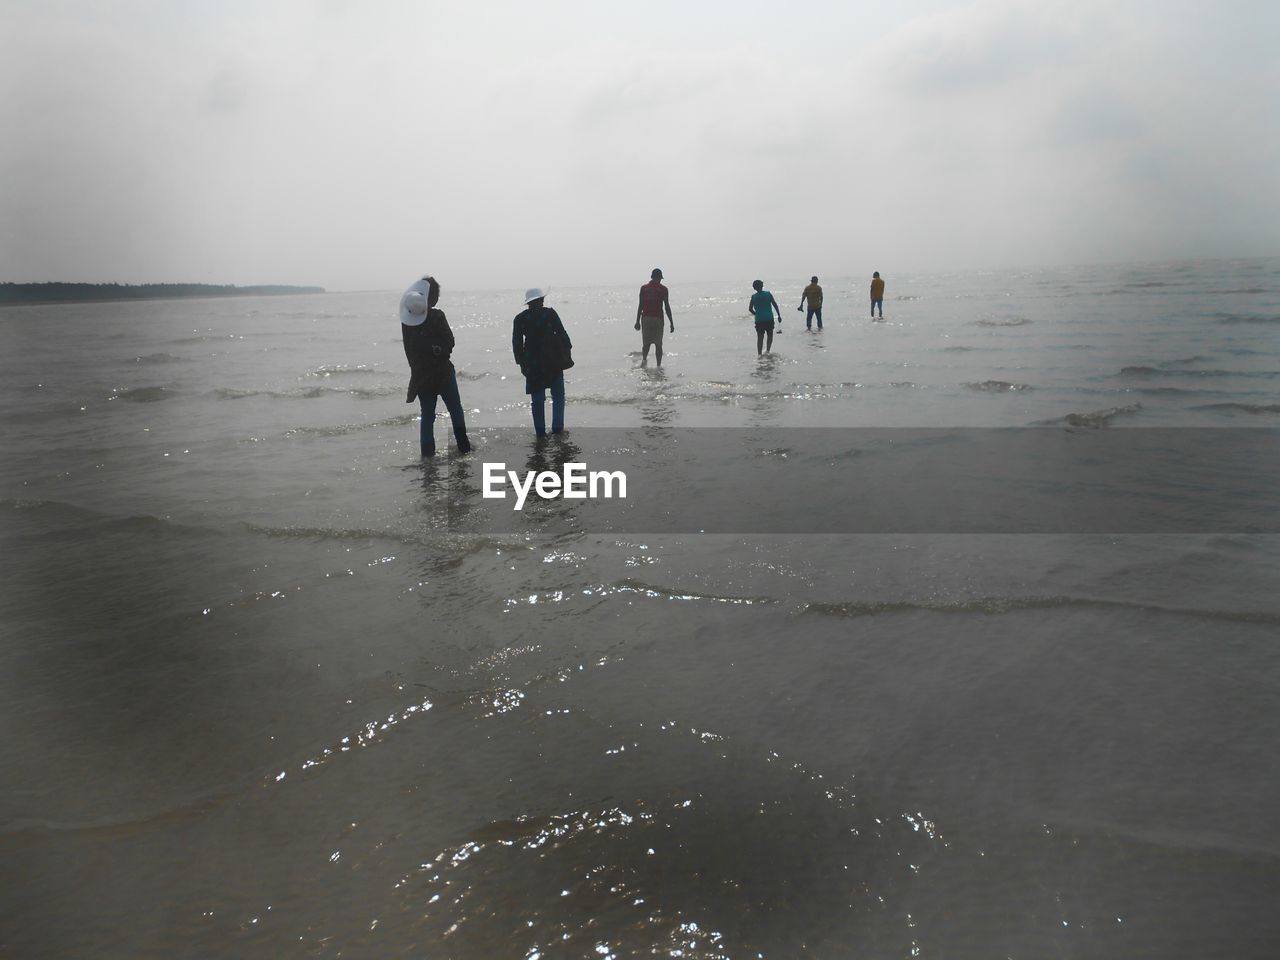 VIEW OF PEOPLE ON BEACH